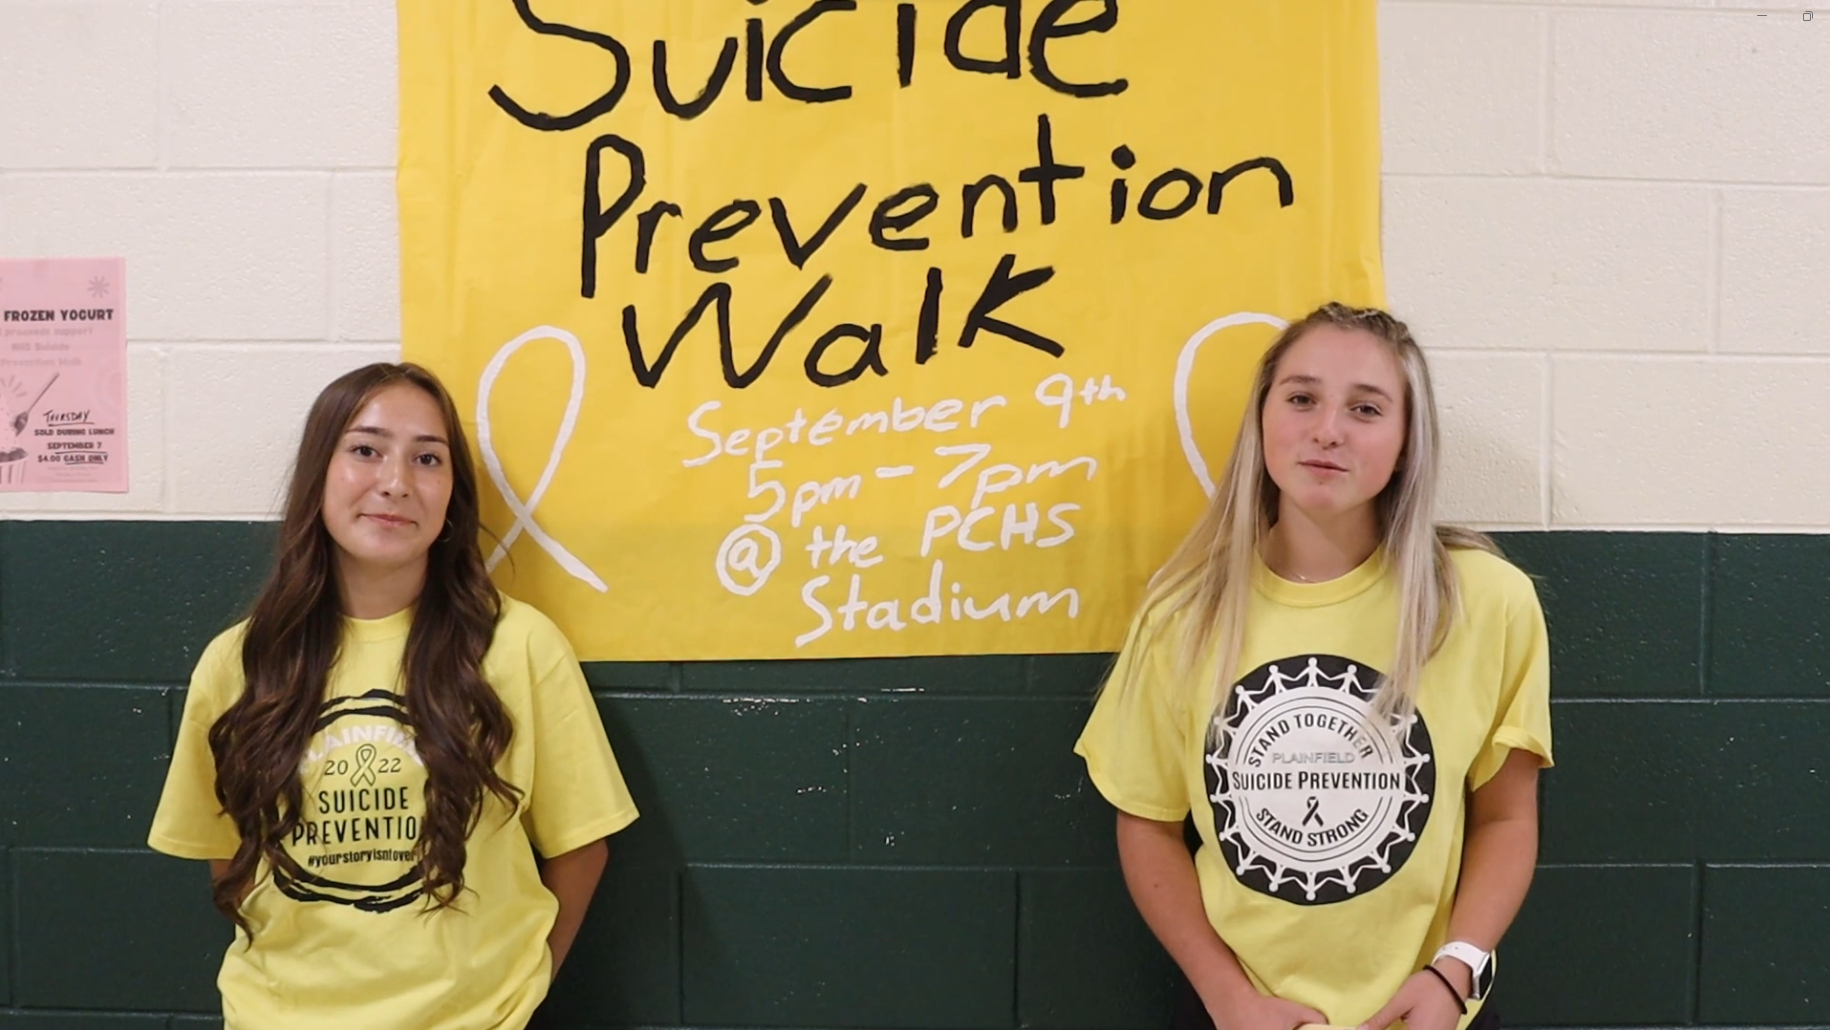 Members of National Honors Society give an announcement about the Suicide Prevention Walk.